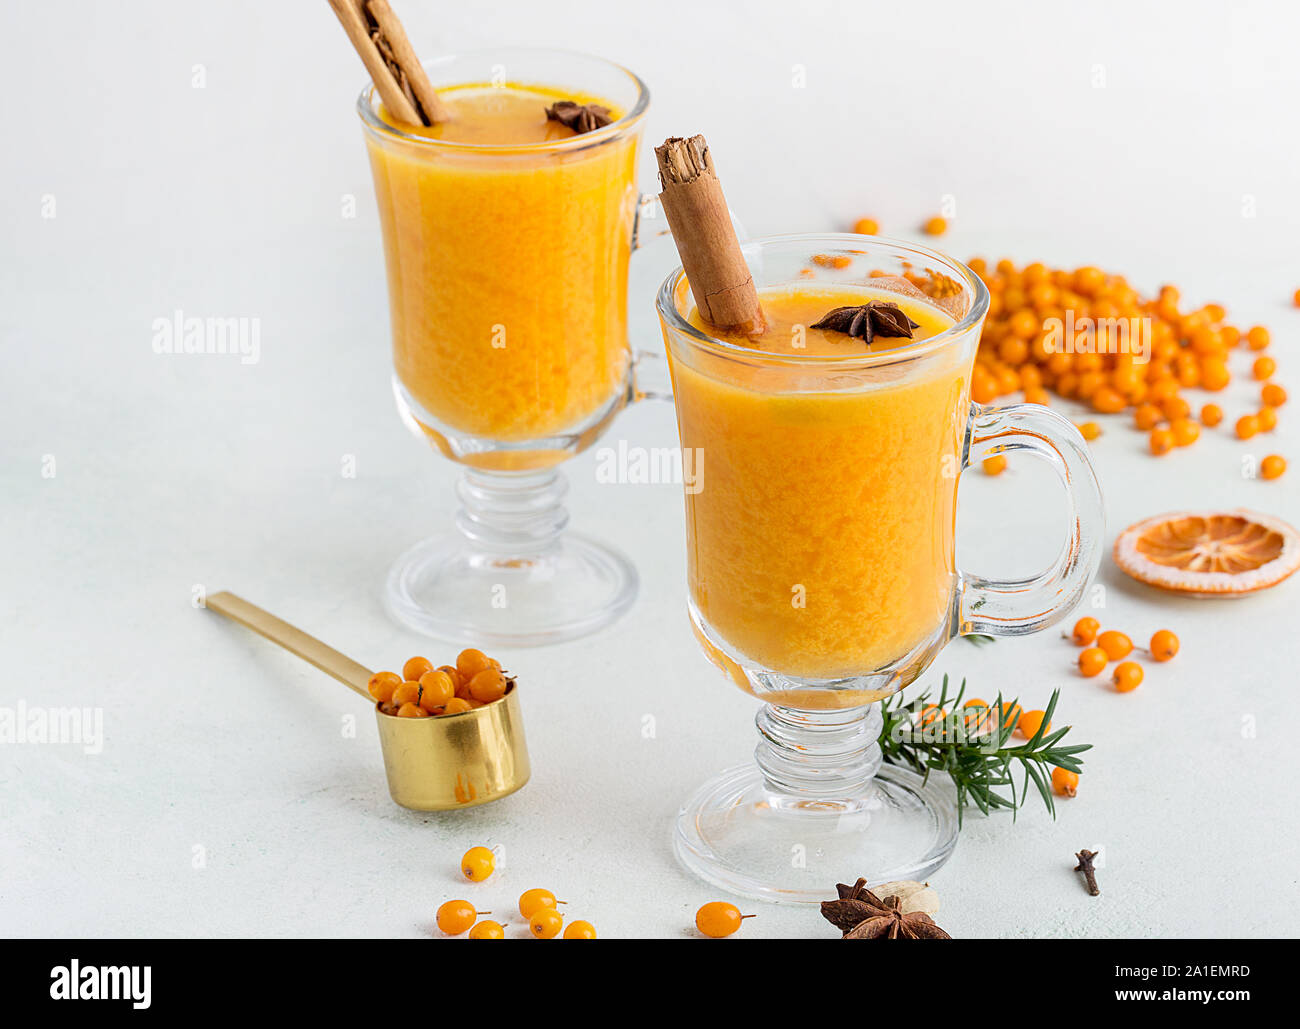 Banner with hot beverages as sea buckthorn on white background. Concept of hot drinks with ingredients Stock Photo